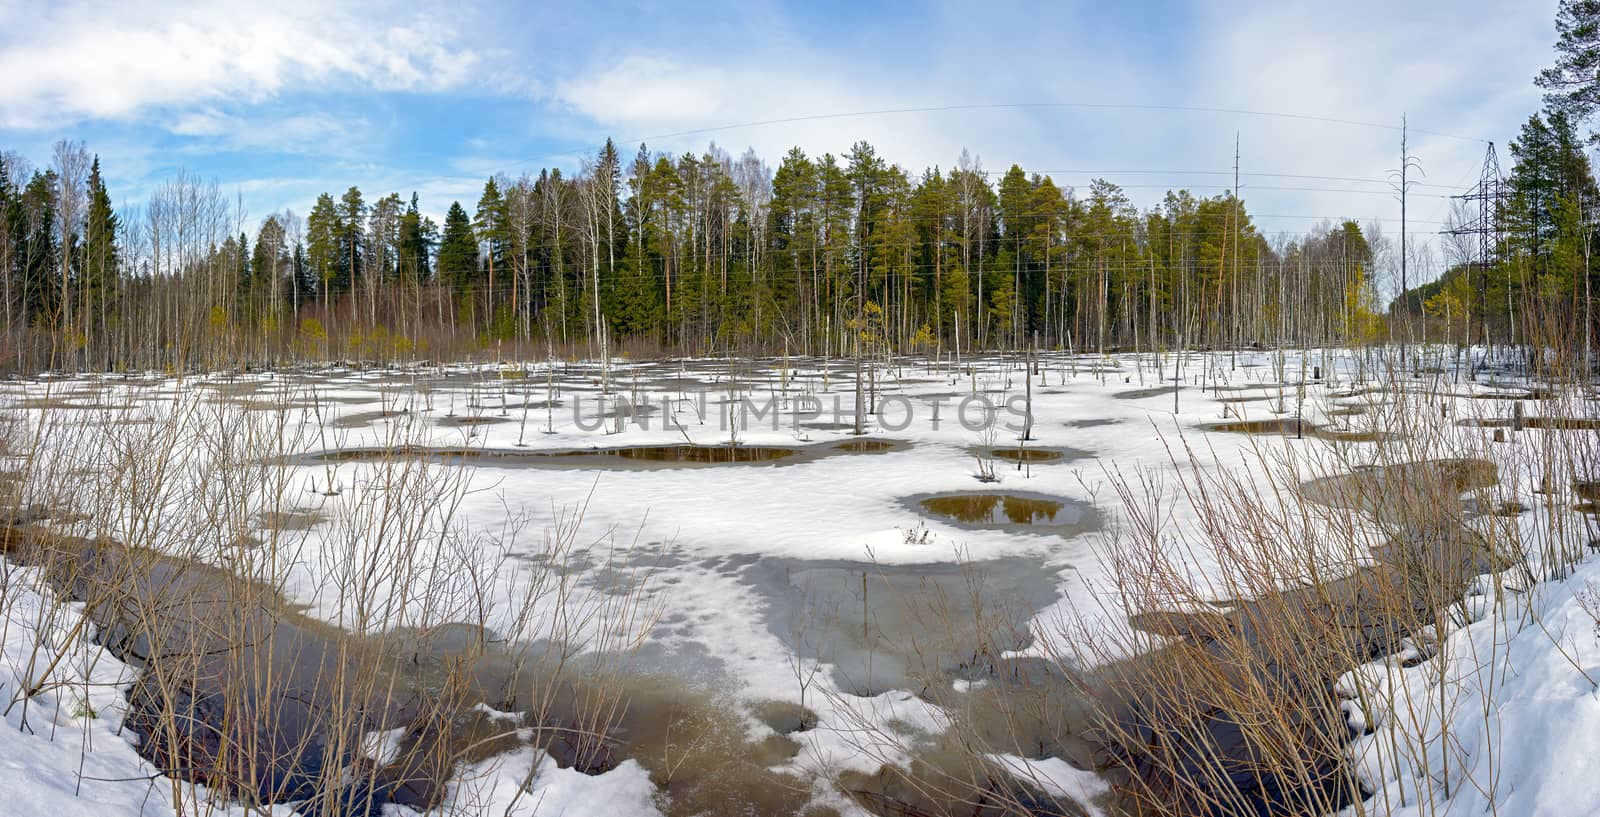 A swamp swollen from meltwater is preparing to leave the banks on the background of coniferous forest.